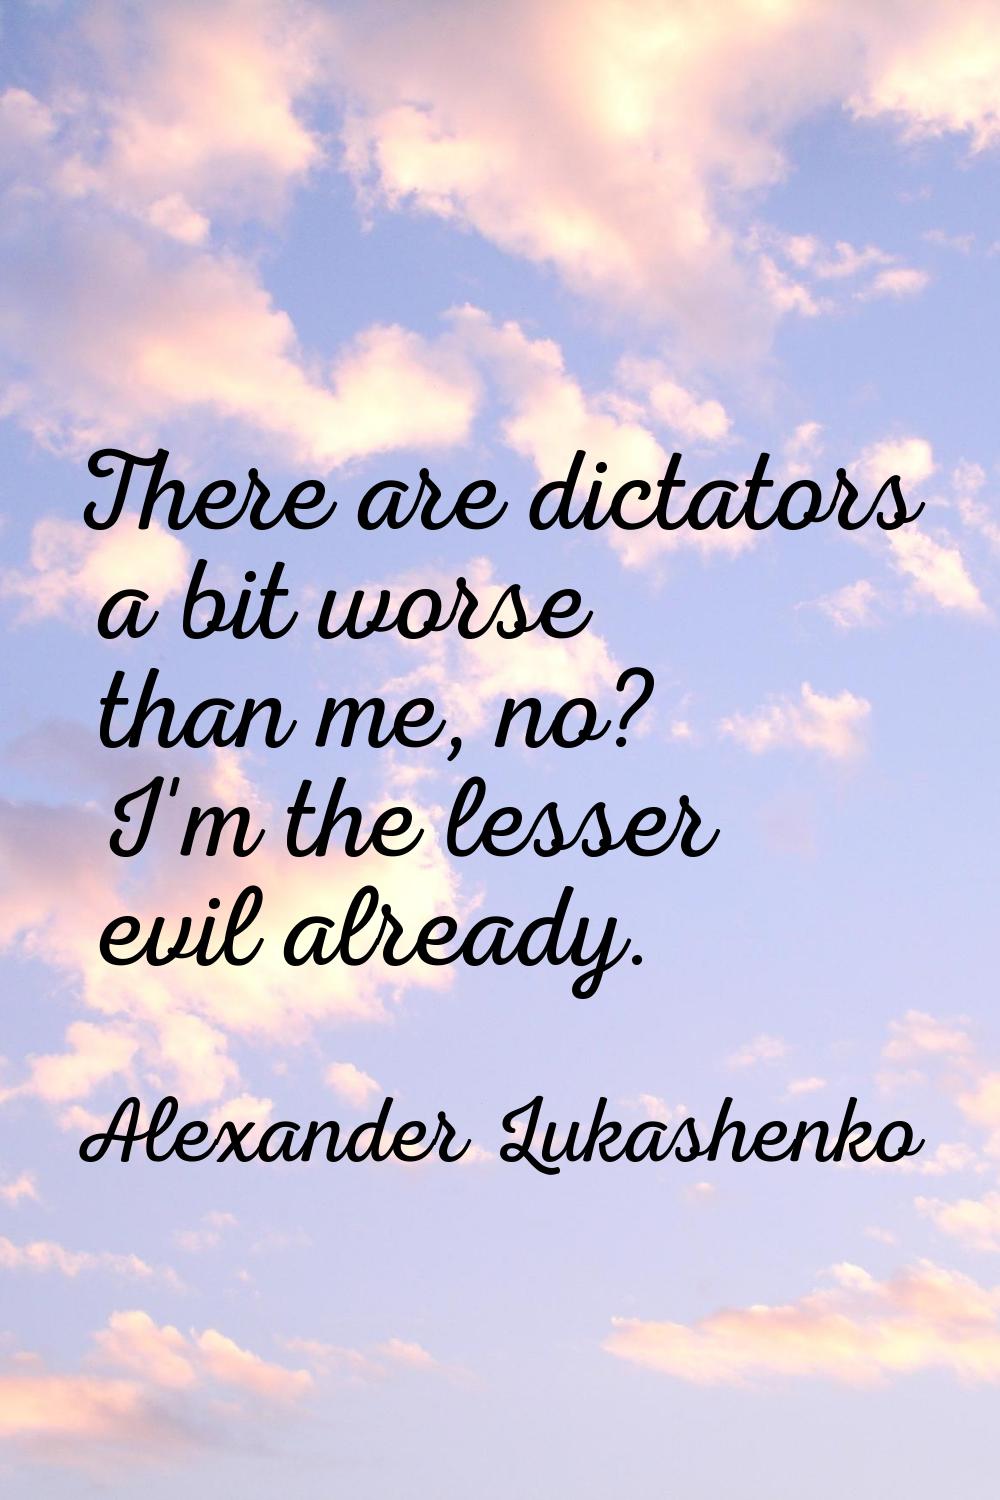 There are dictators a bit worse than me, no? I'm the lesser evil already.